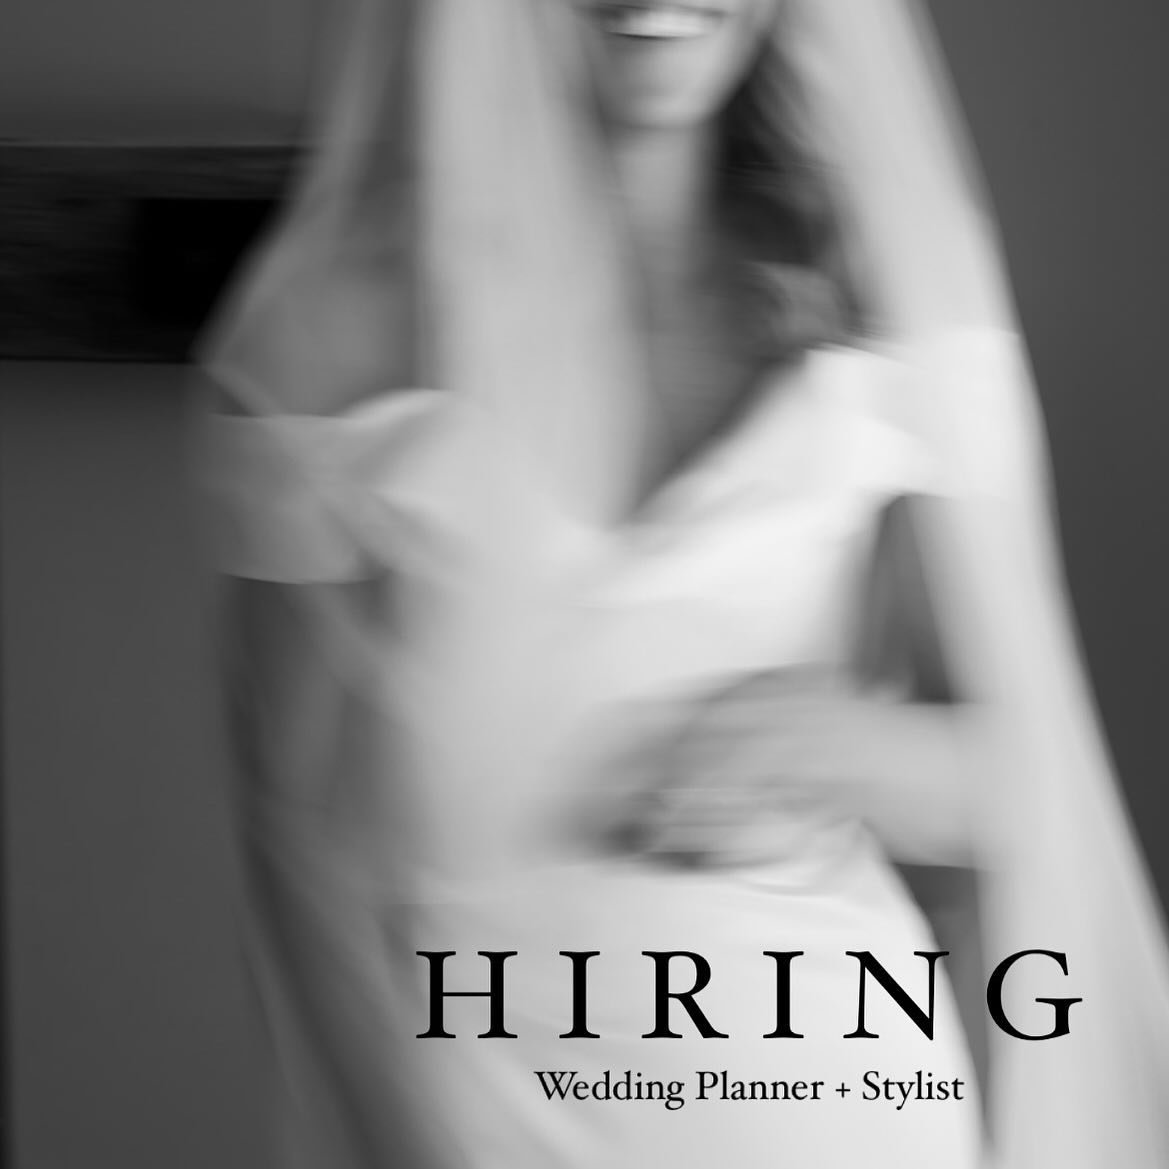 HIRING

Wedding Planner + Stylist

We are on the look out for the next AKC member. Queenstown based role, beginning part time during training and quickly moving into a full time, long term position.

Organisational skills a must, personable, hard wor